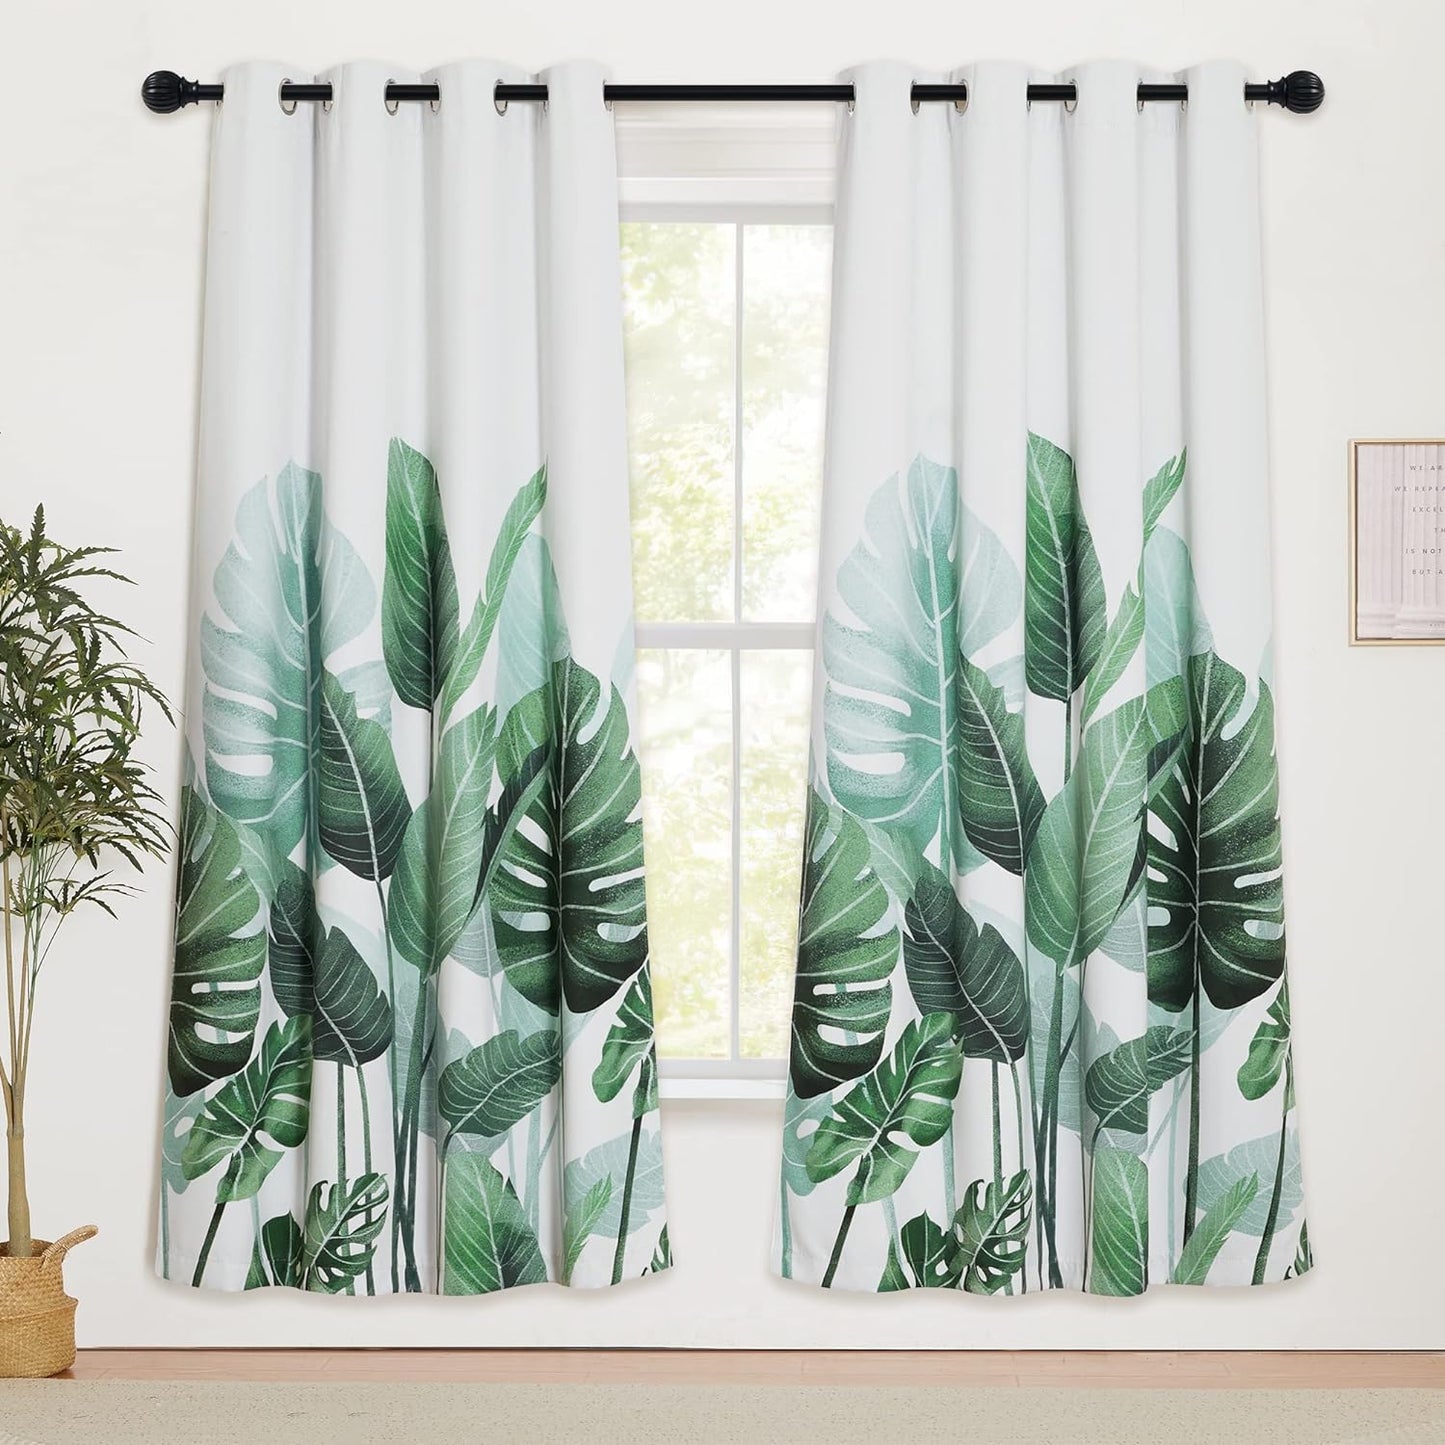 KGORGE Blackout Curtains for Bedroom, Farmhouse Tripical Leaves Pattern Curtains & Drapes Insulating Privacy Window Treatment for Dining Living Room Office Studio, W52 X L63 Inch, 2 Panels  KGORGE Polyester W52 X L72 | Pair 